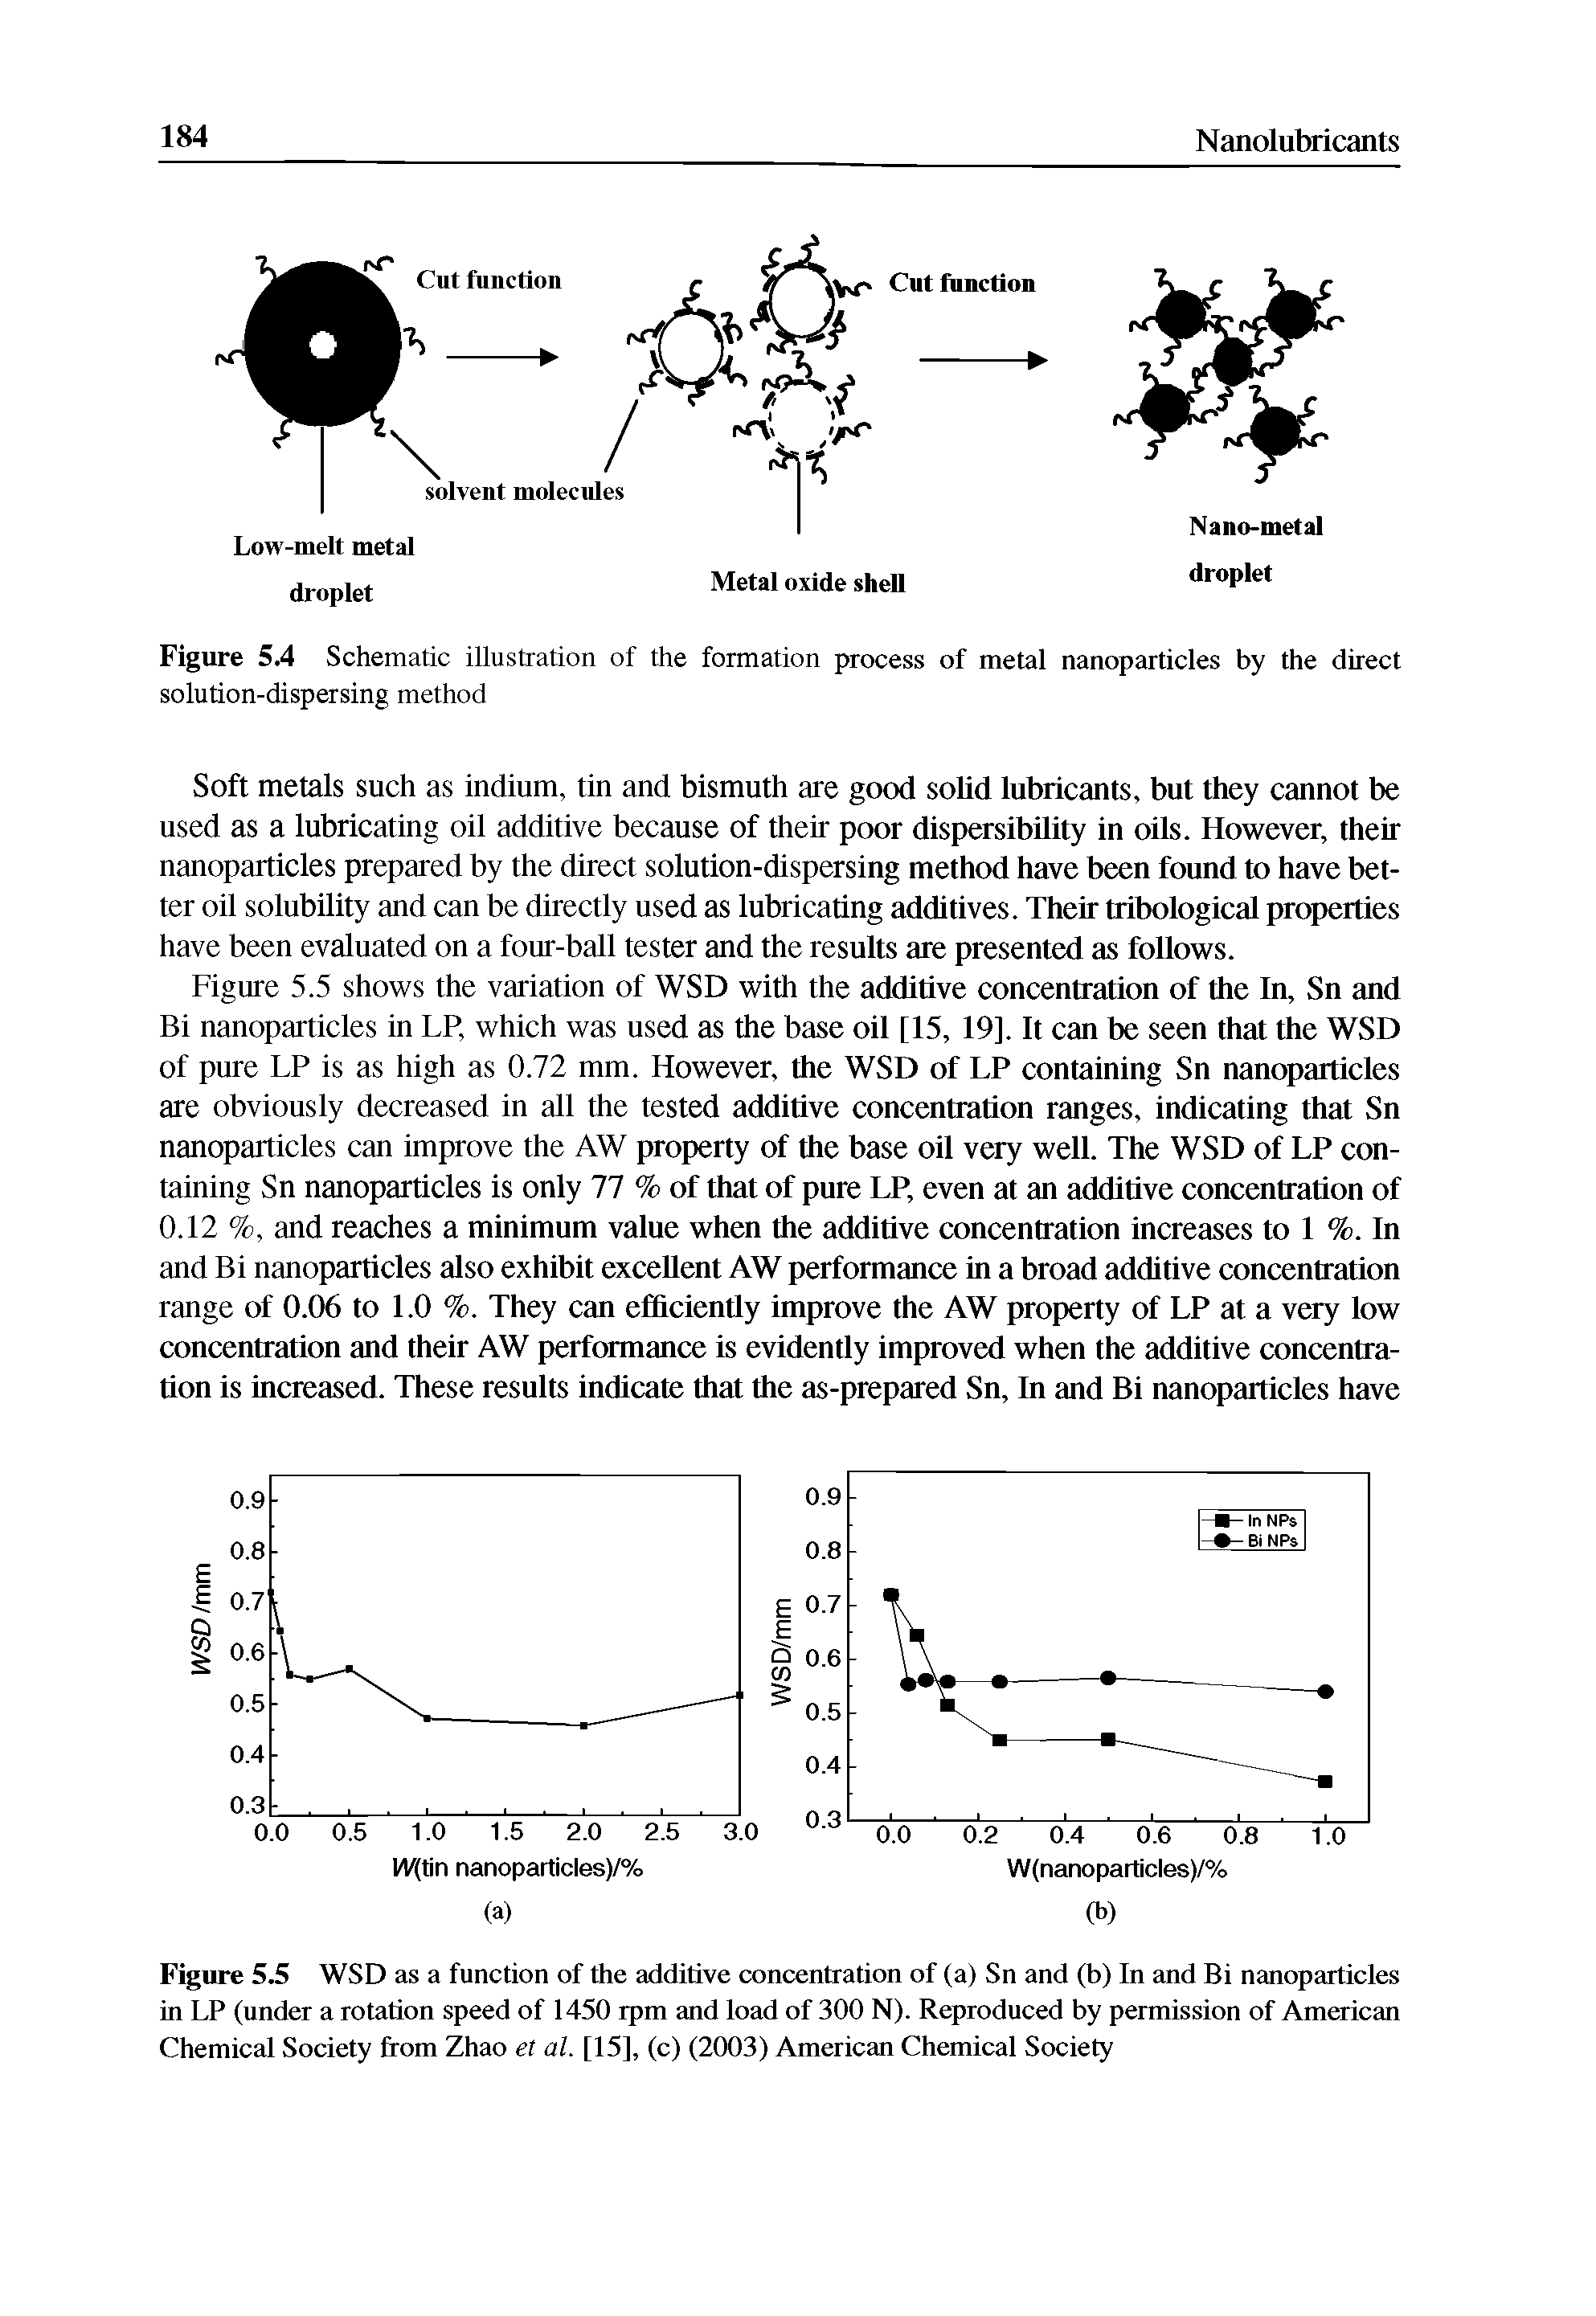 Figure 54 Schematic illustration of the formation process of metal nanoparticles by the direct solution-dispersing method...